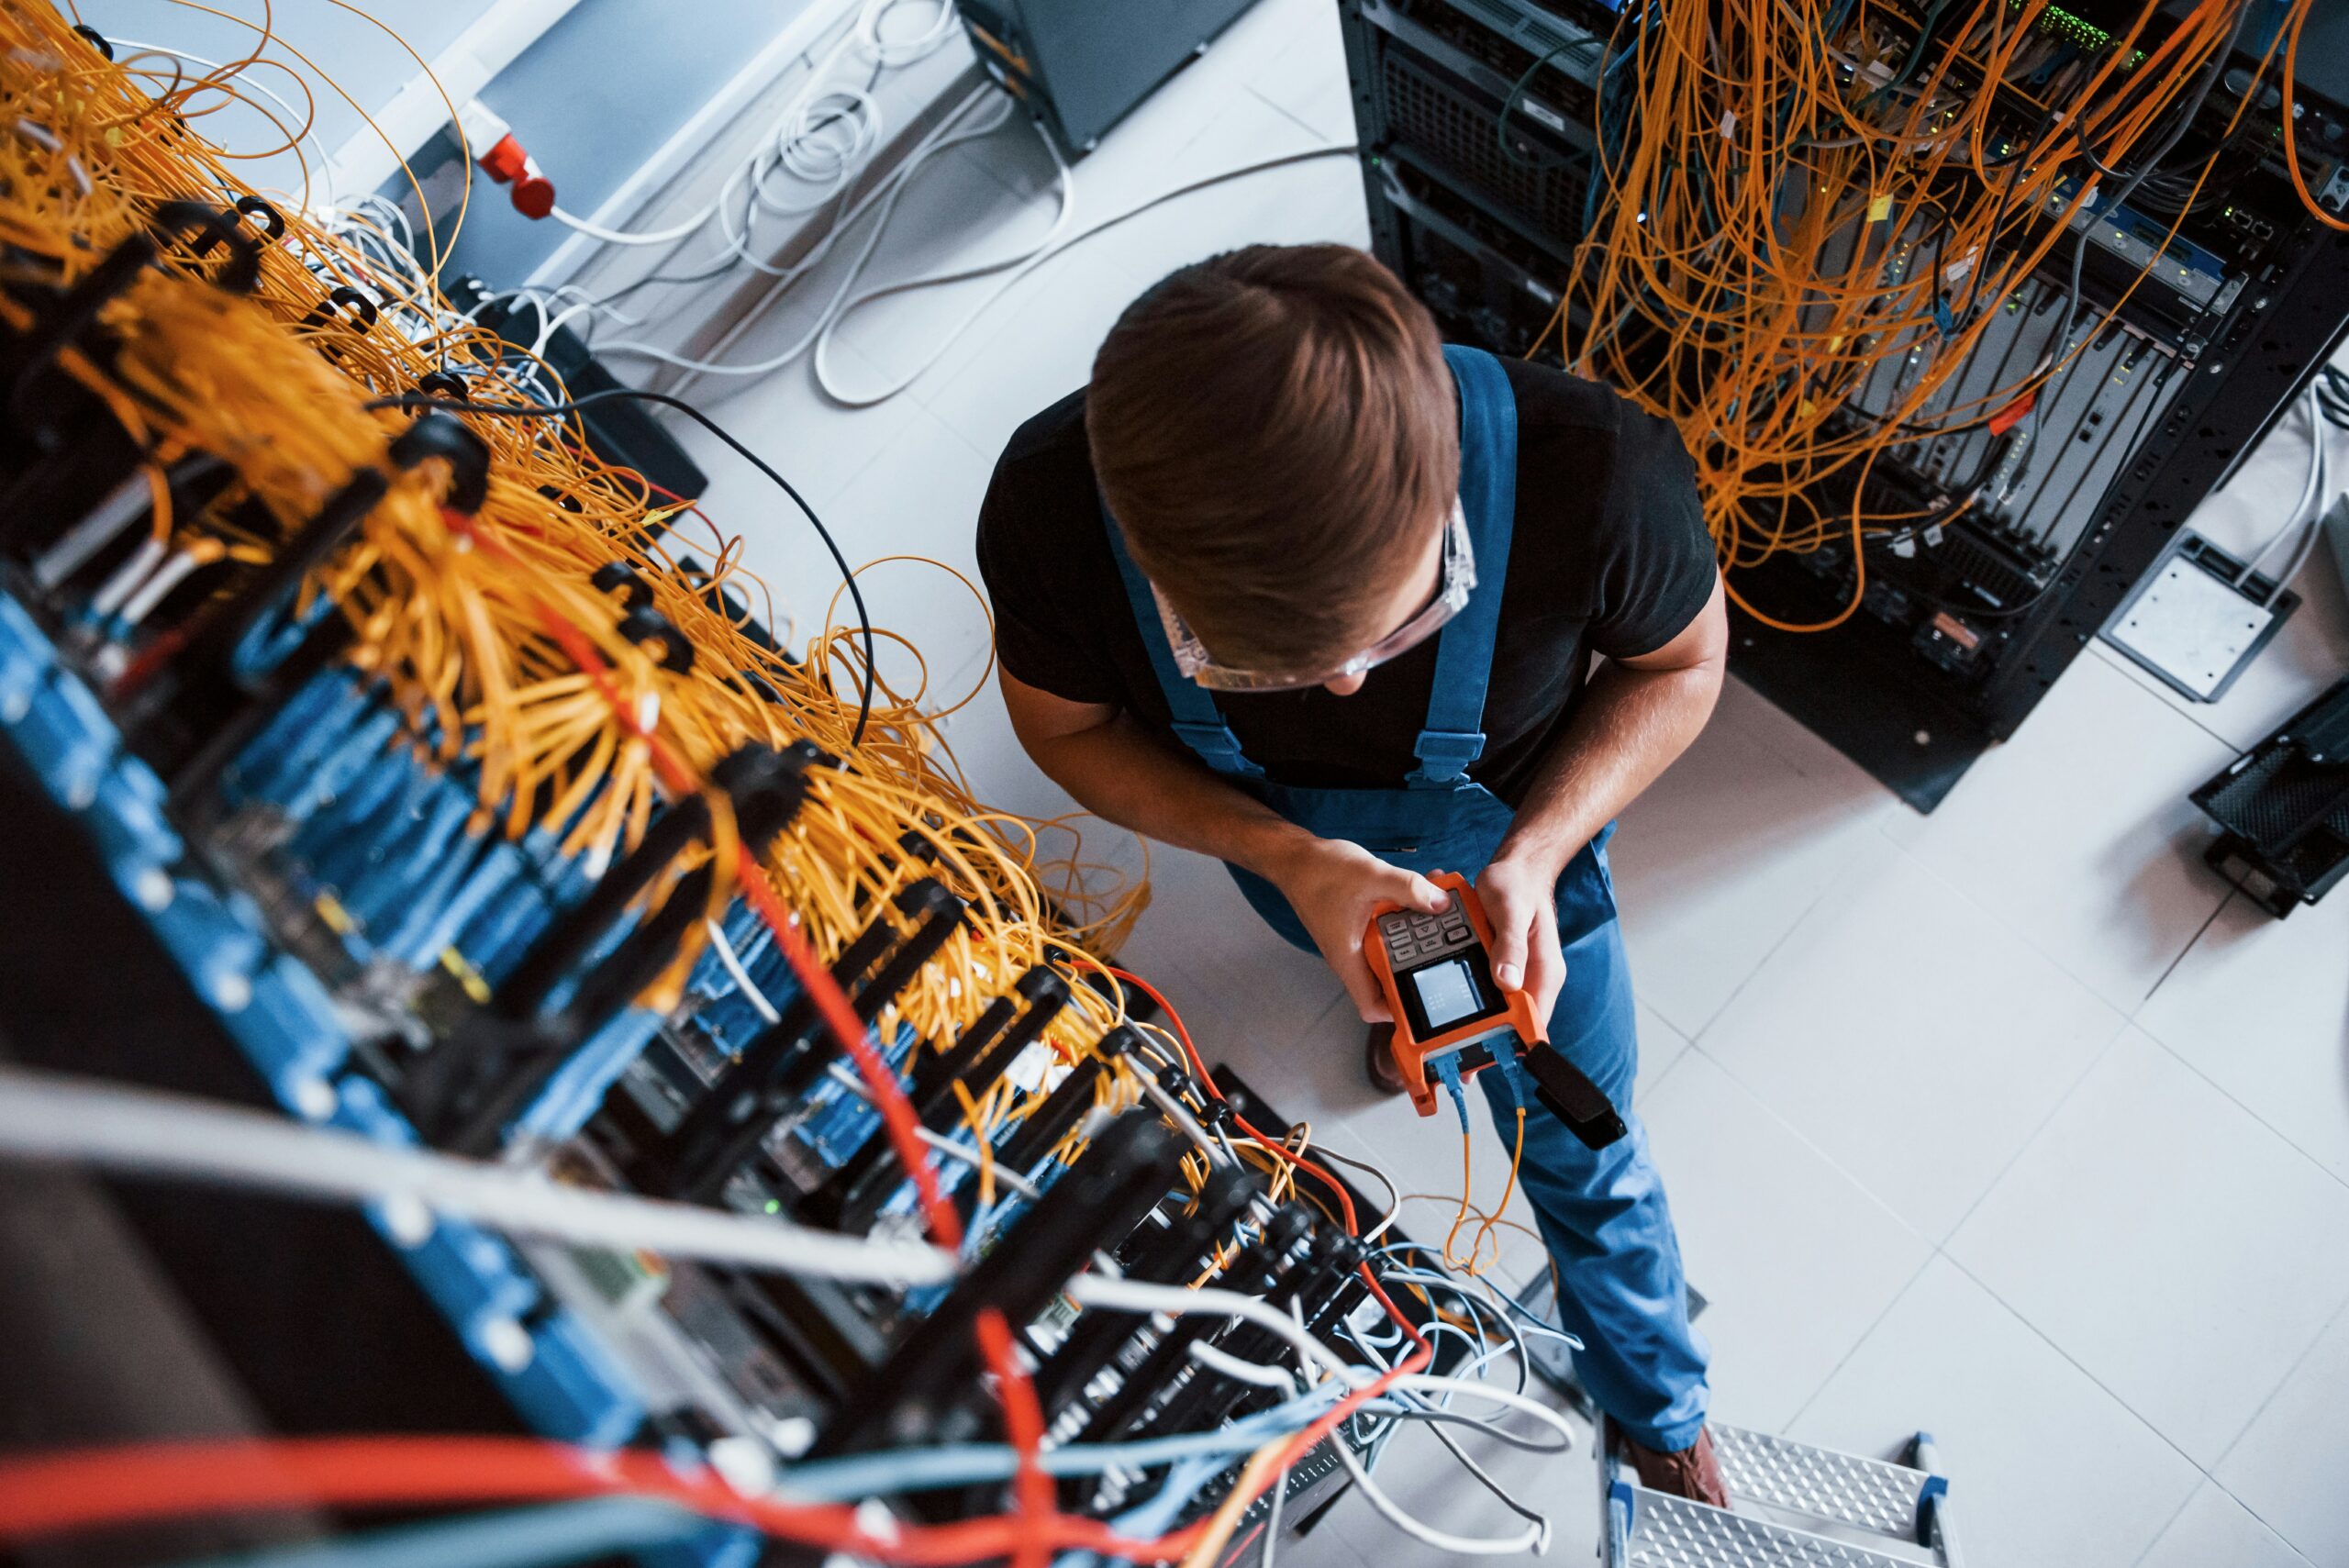 Technician using diagnostic equipment to troubleshoot network issues in a server room as part of managed services offered.